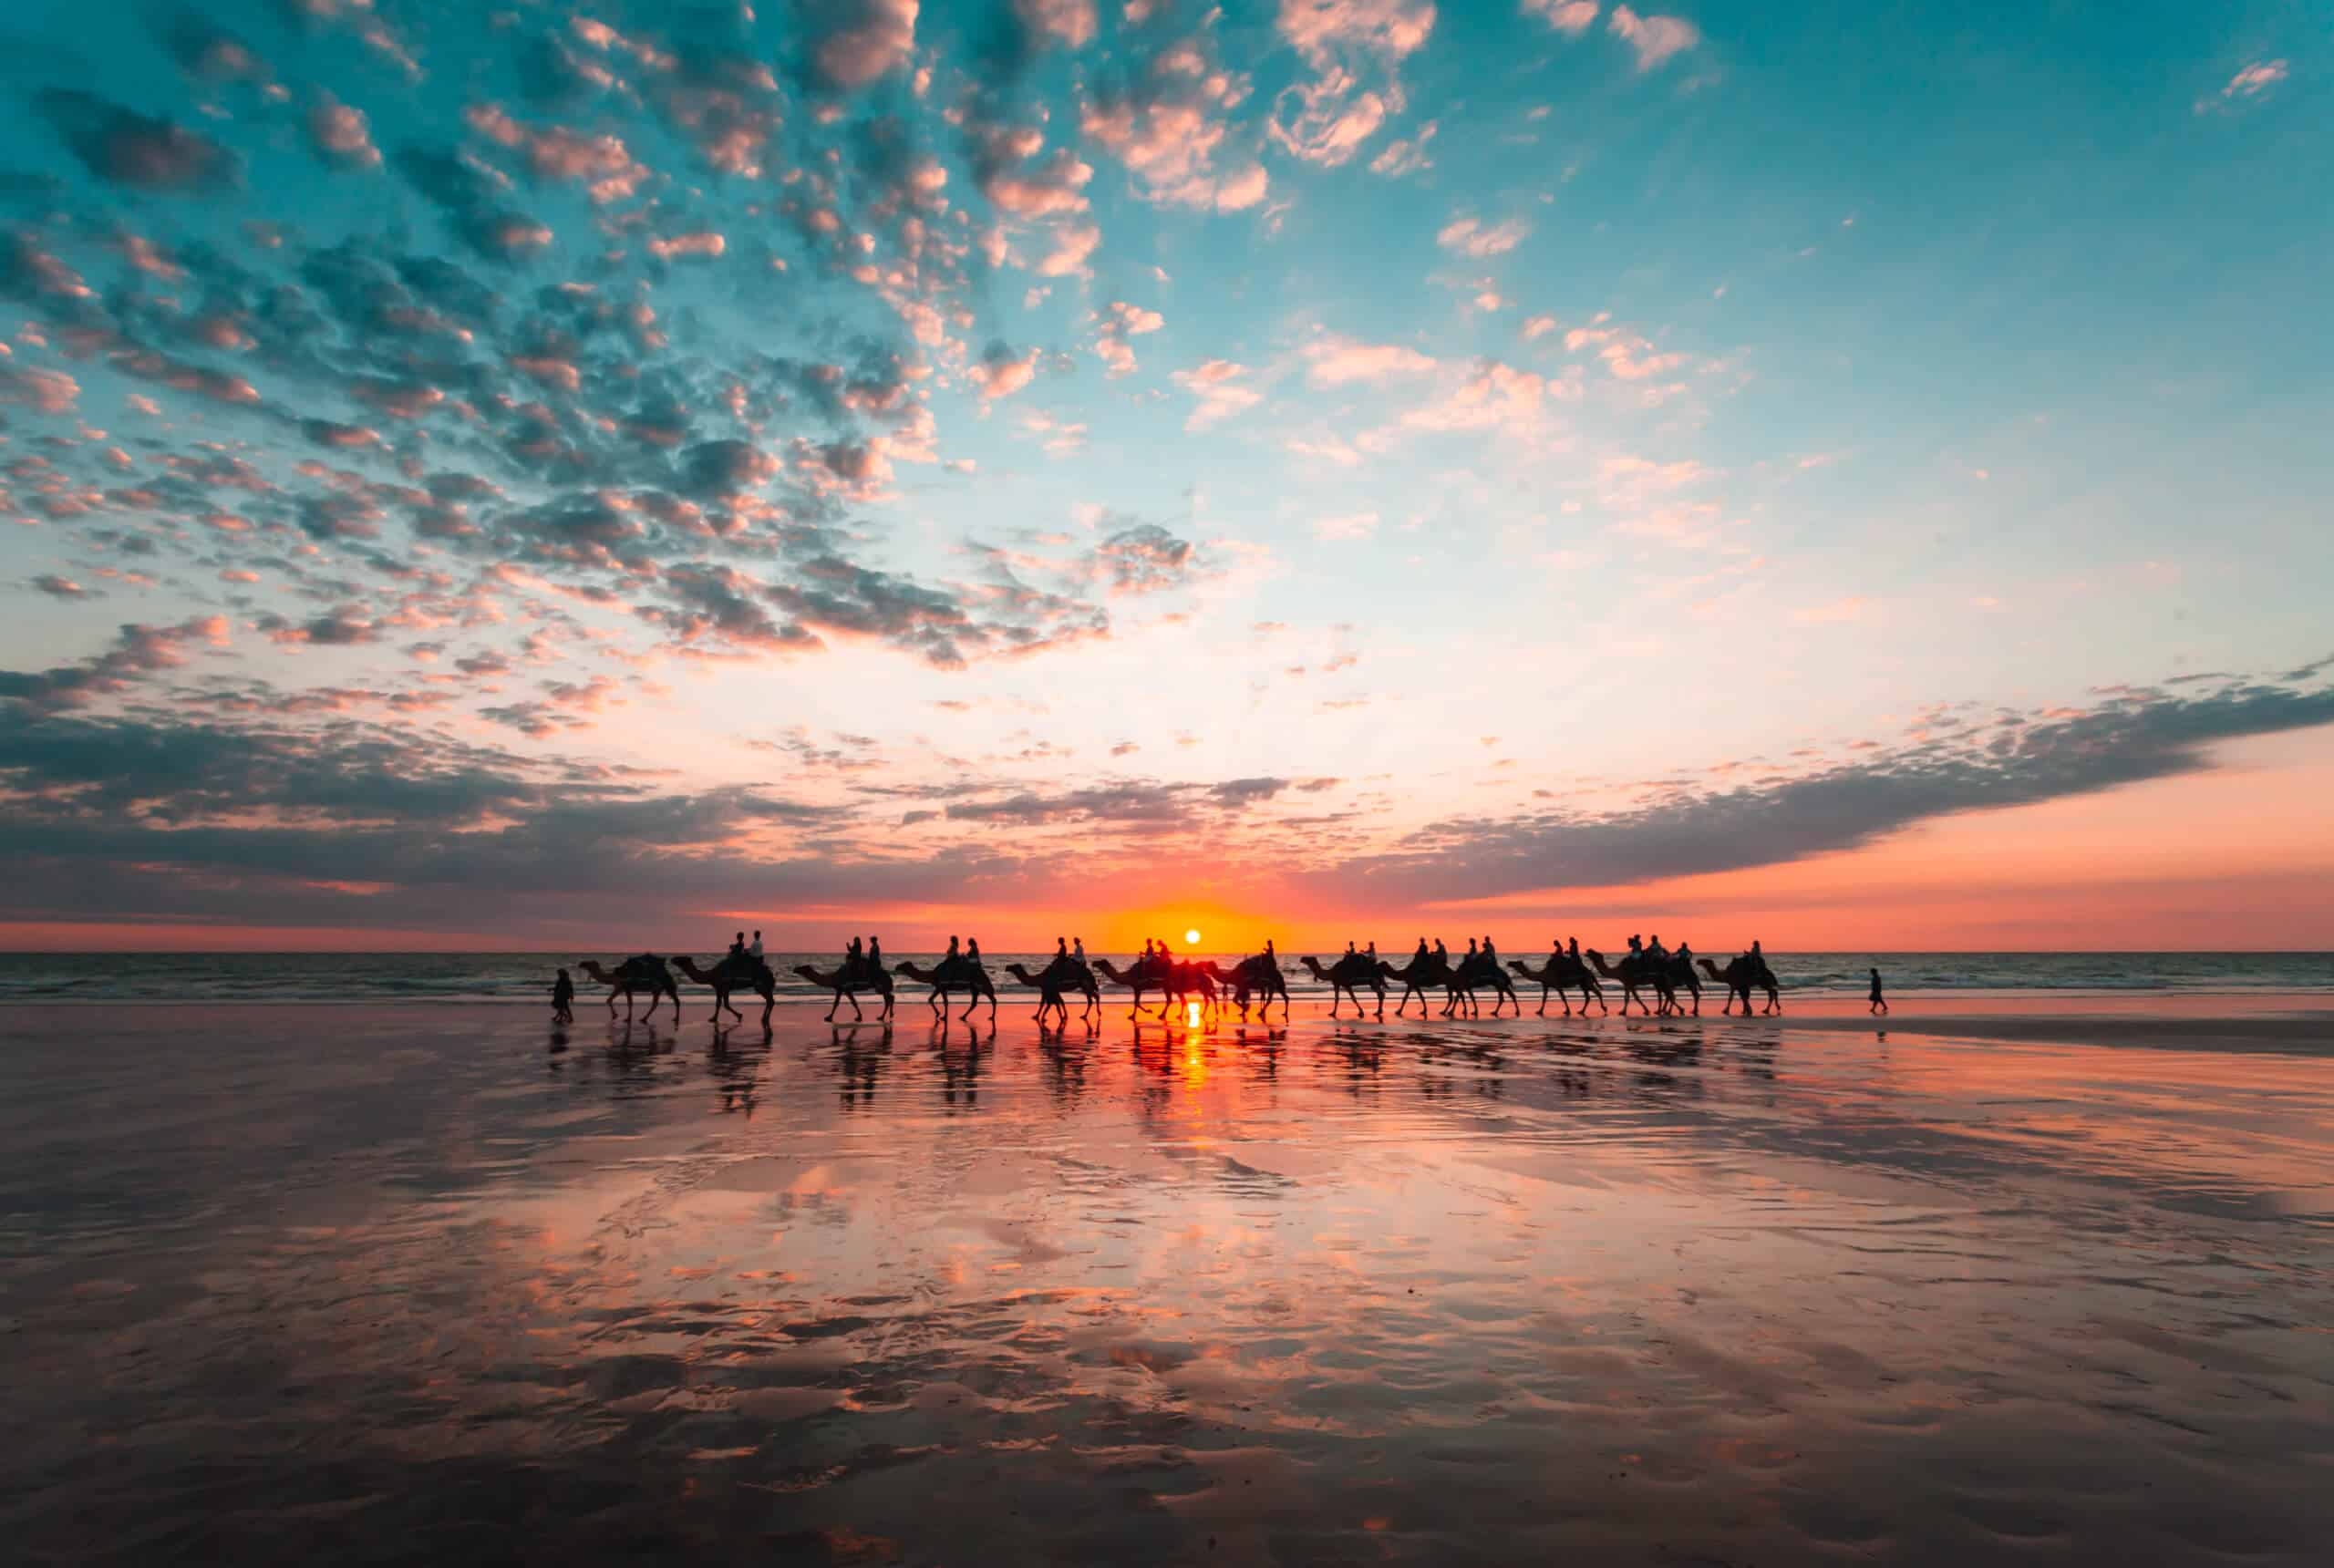 A photo of a beautiful beach in Broome, Western Australia, with the sun setting in the background and the silhouette of camels in the distance.